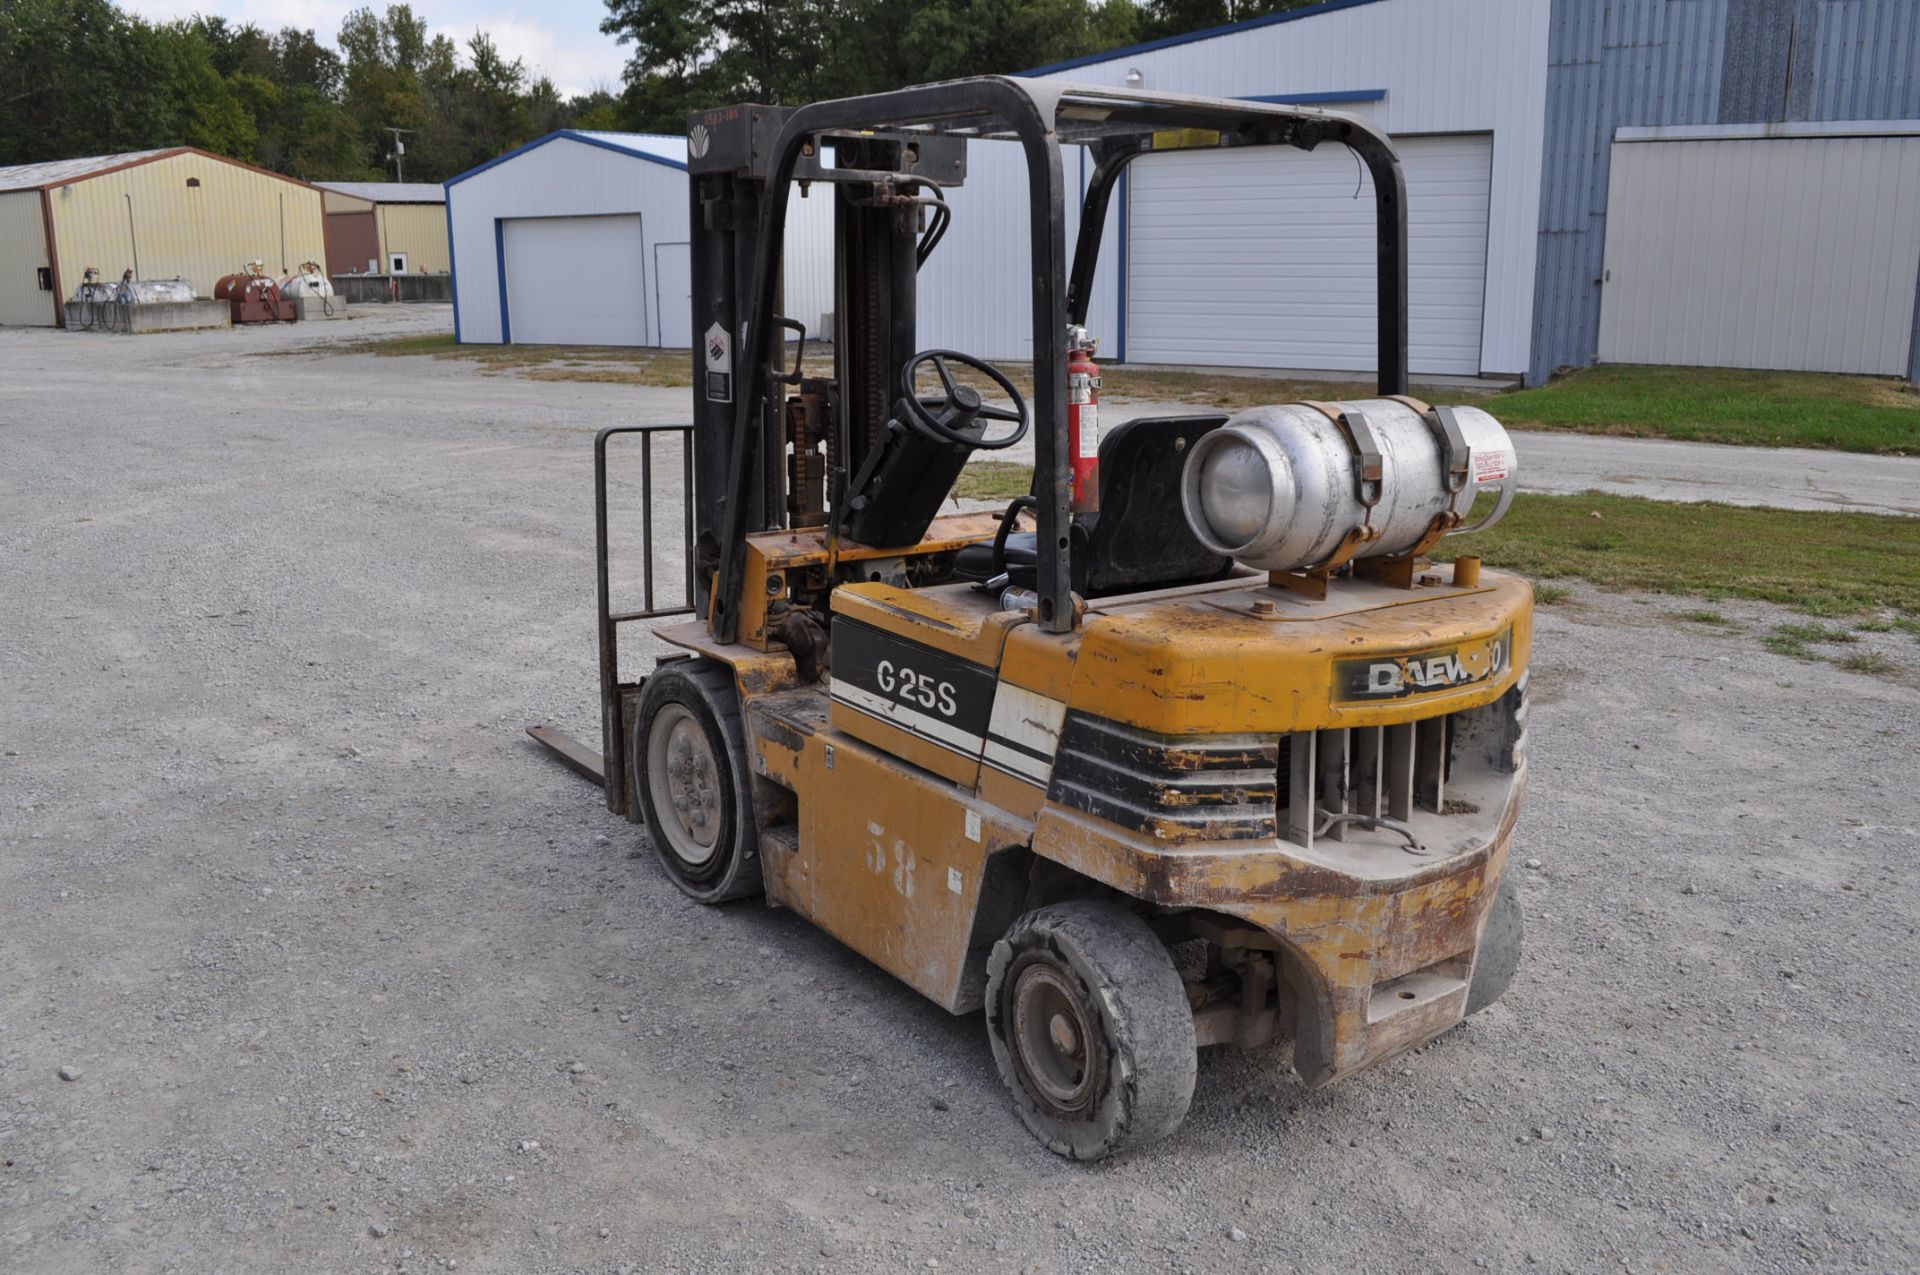 Daewoo G25S forklift, propane, sideshift, 7.00x15 front tires, 6.50-10 rear tires, 3 stage mast - Image 2 of 7